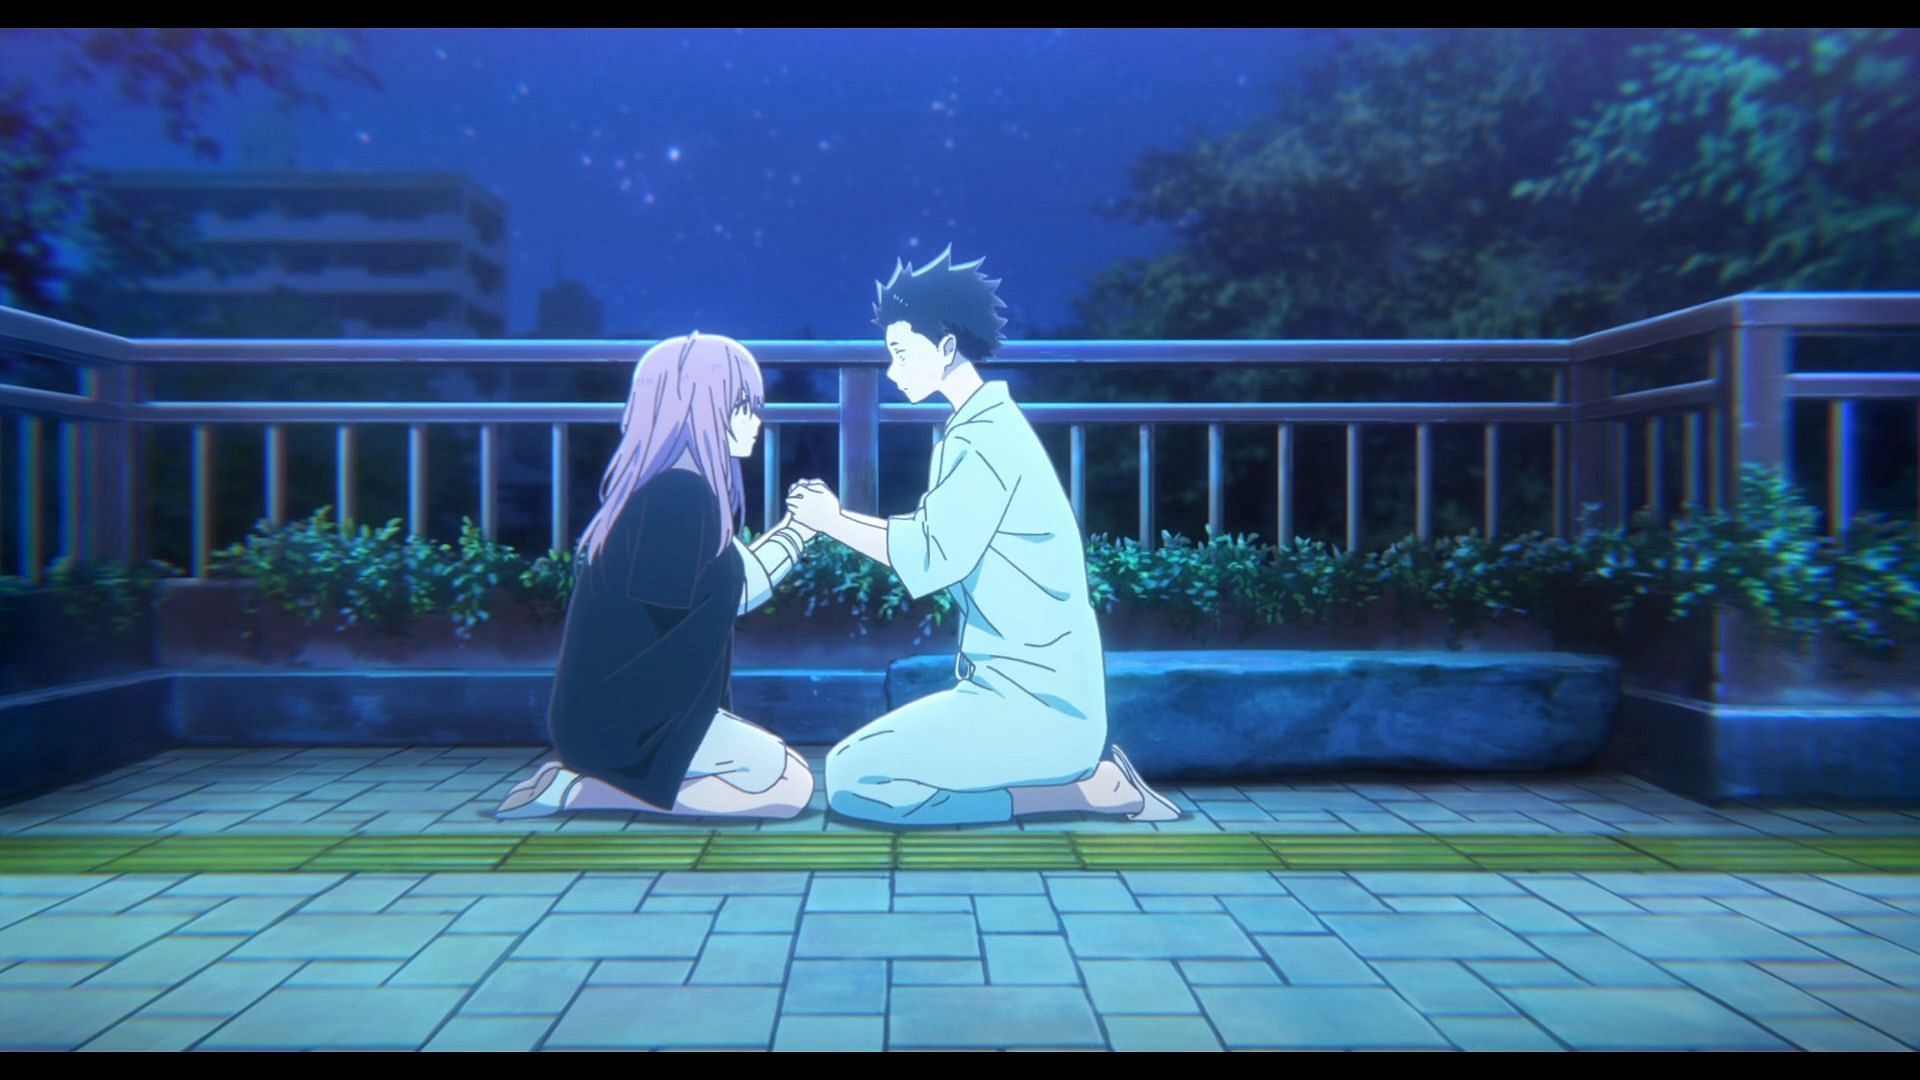 Shouko and Shouya, as seen in the anime A Silent Voice (Image via Kyoto Animation)